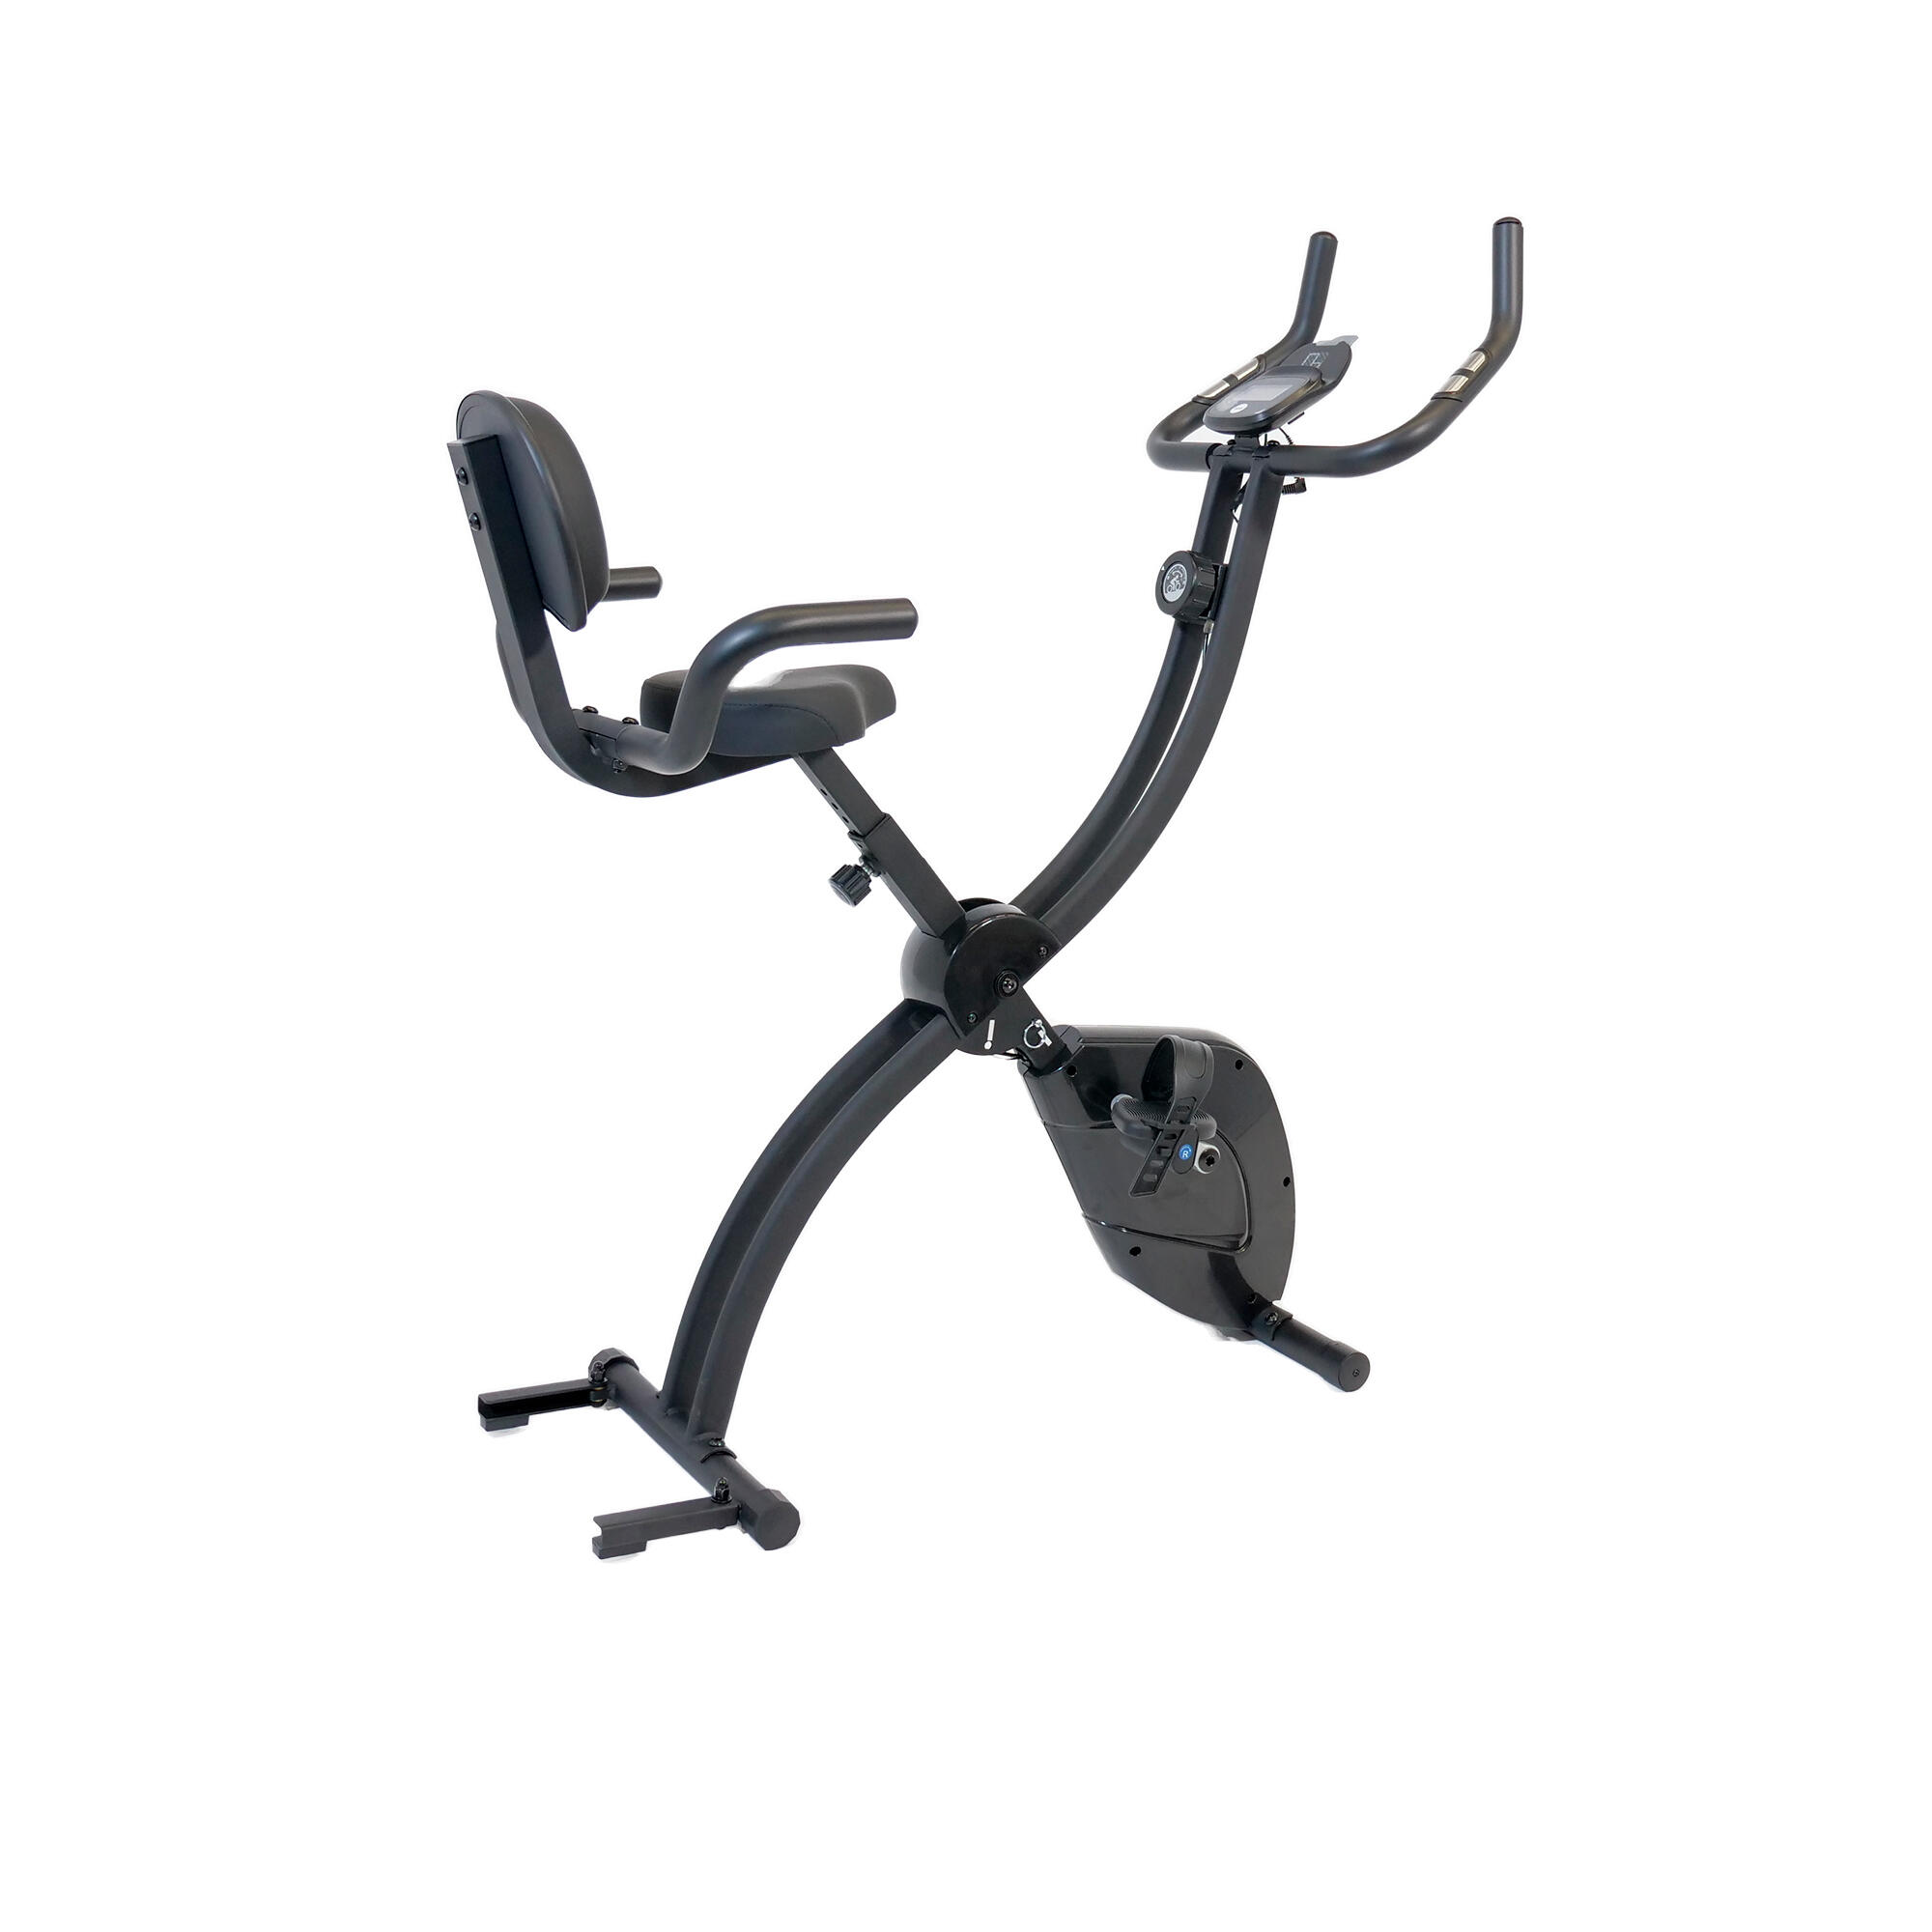 Exercise Bike X-Bike - Collapsible, Compact, and Very Quiet 1/6